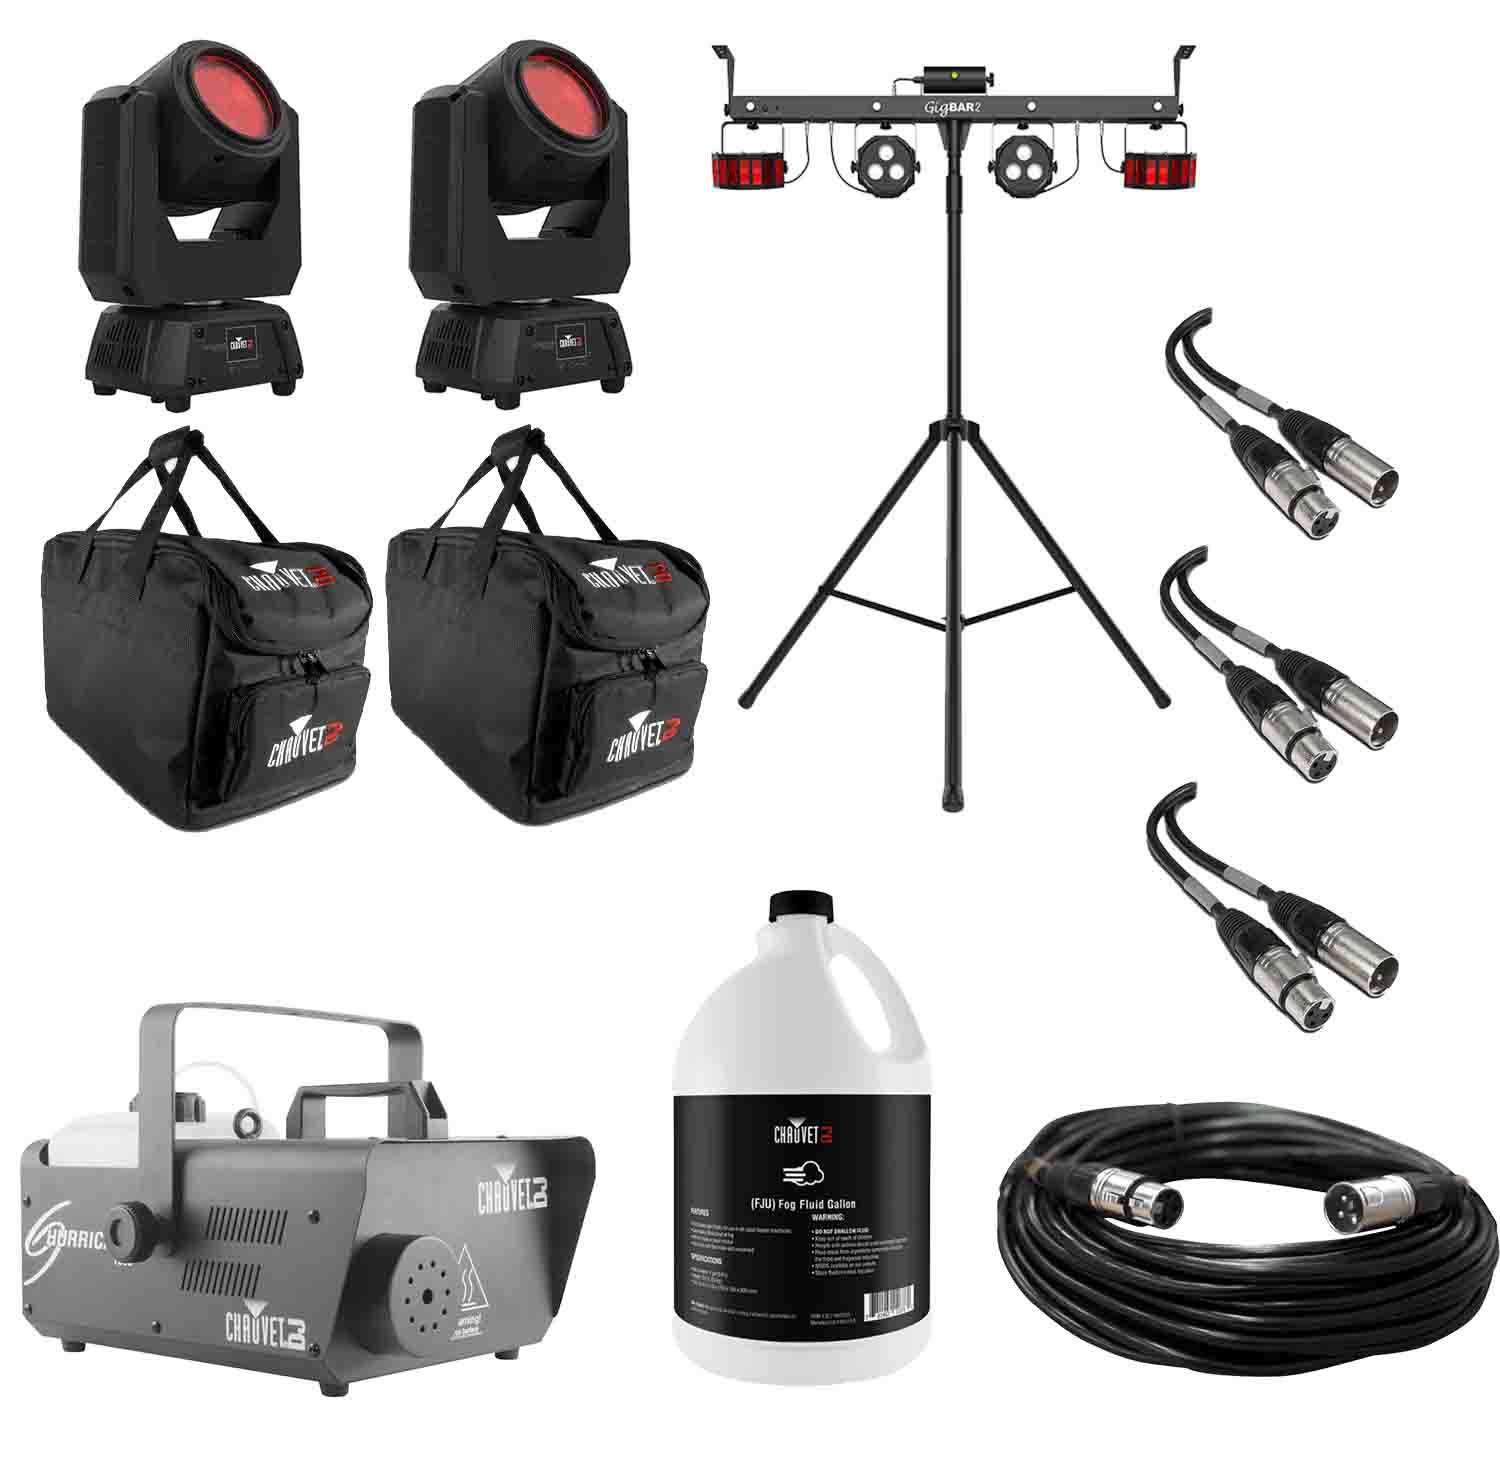 Chauvet DJ Live Sound Lighting Package for Small Concert with Moving Beam Lights - Hollywood DJ